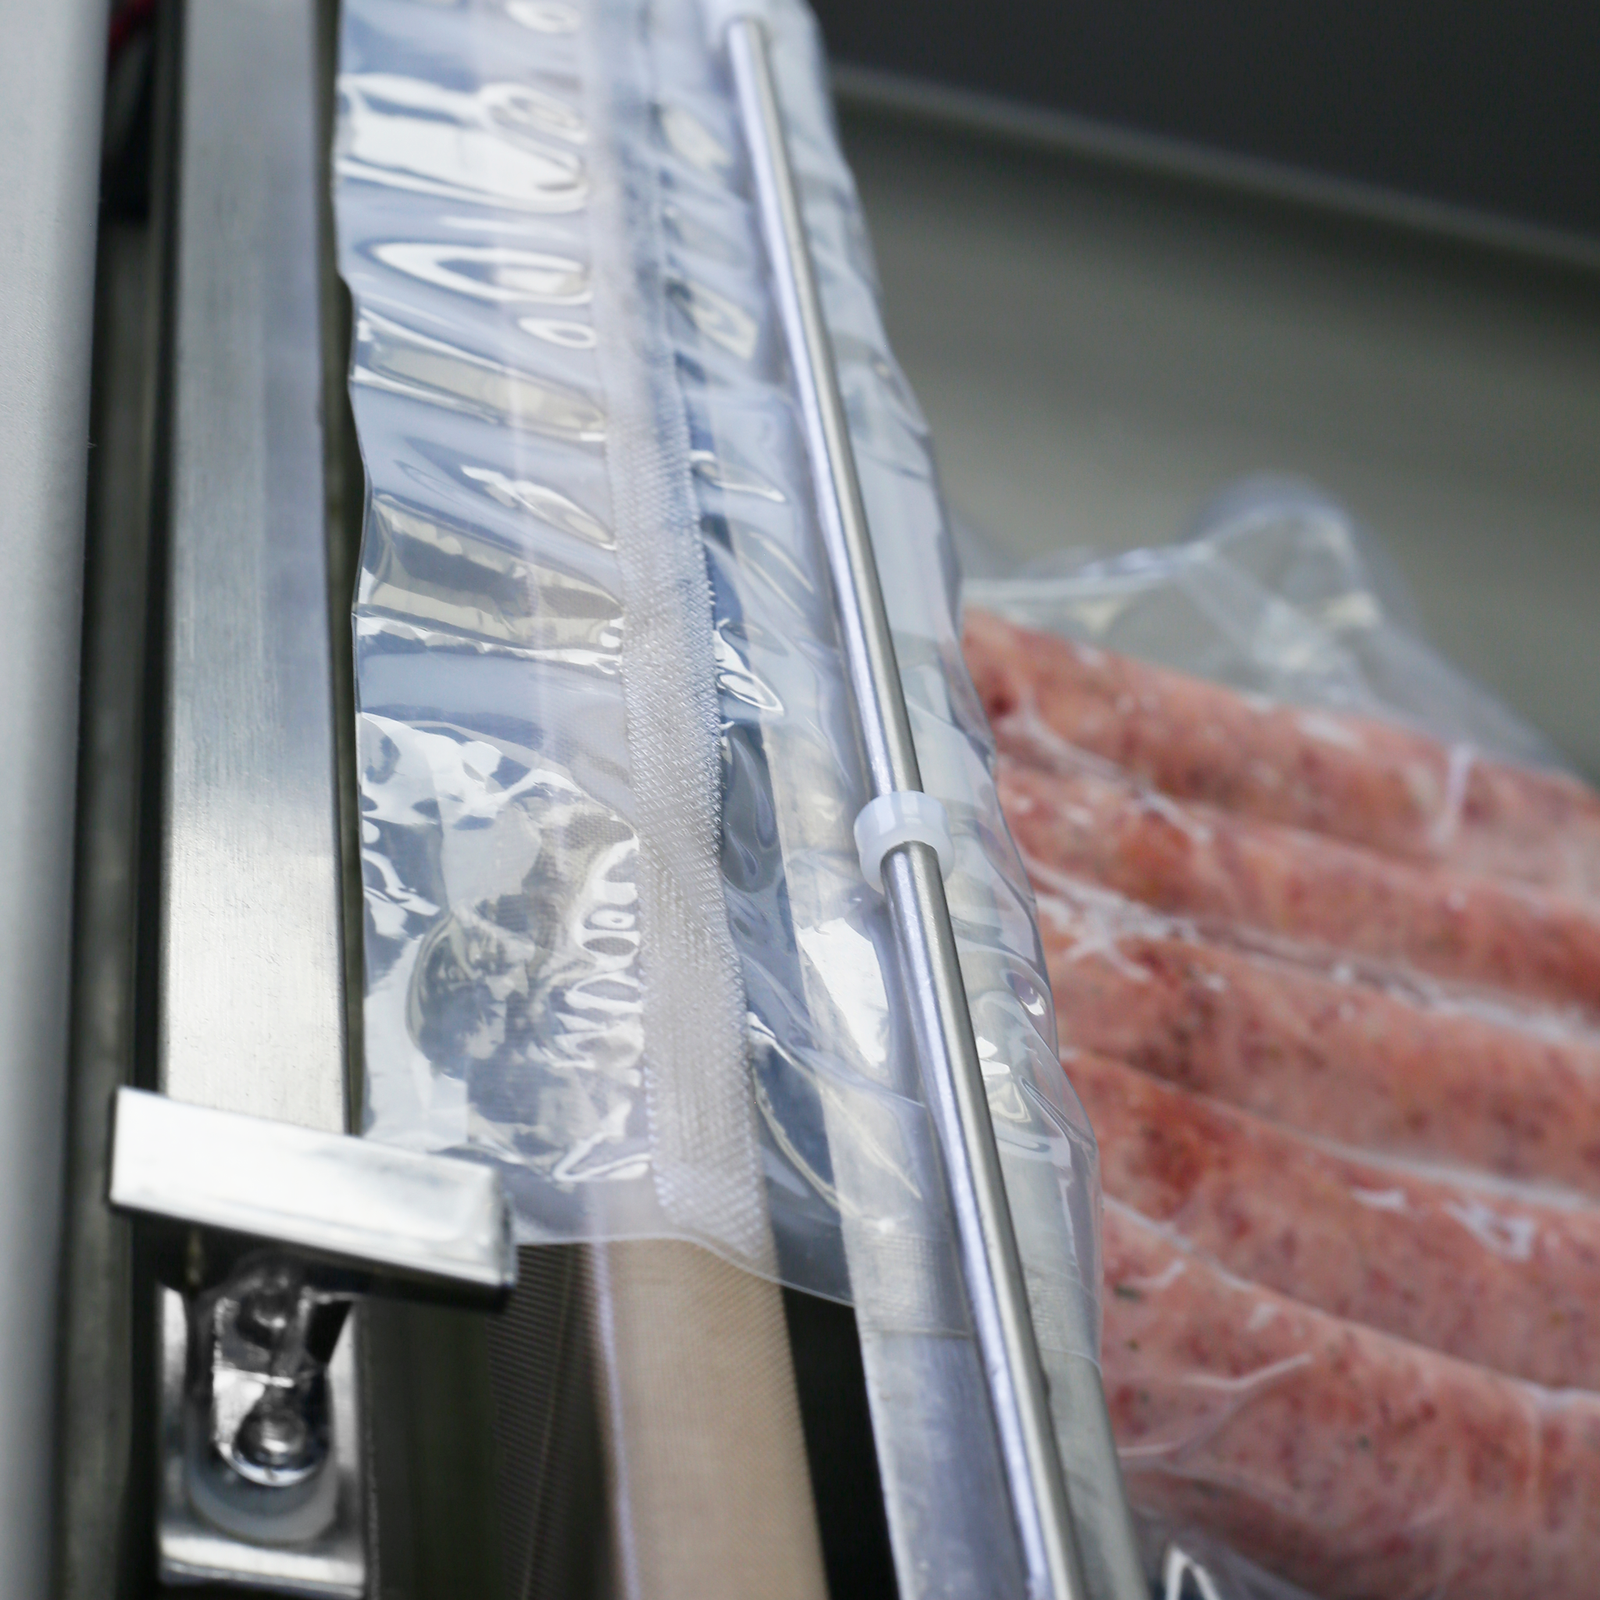 close-up of the vacuum sealer's heating element, the vacuum bag holding bar, and a fresh seal on a plastic bag that is laying on top of the sealing element to begin the process of sealing meat in a bag